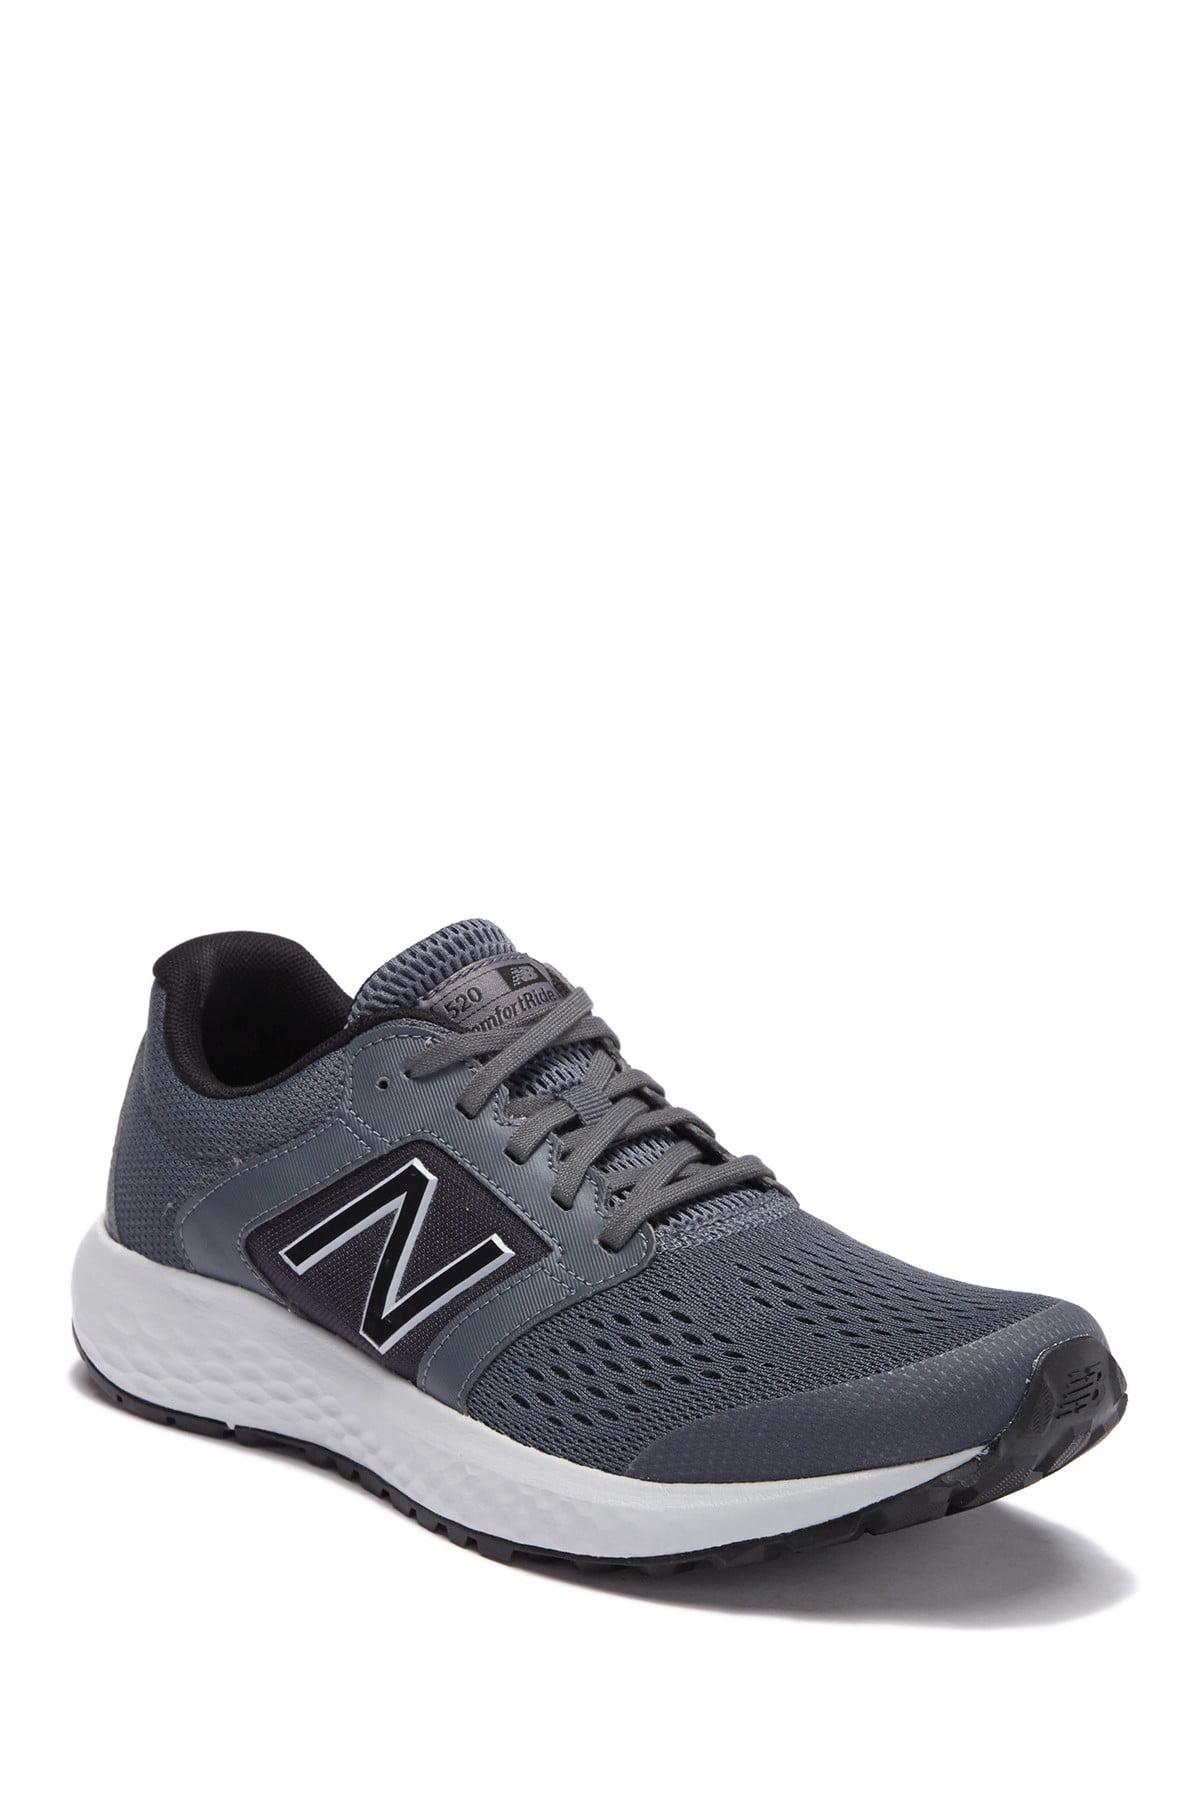 New Balance Synthetic 520 Comfort Ride Running Sneaker in Grey (Gray) for  Men - Lyst